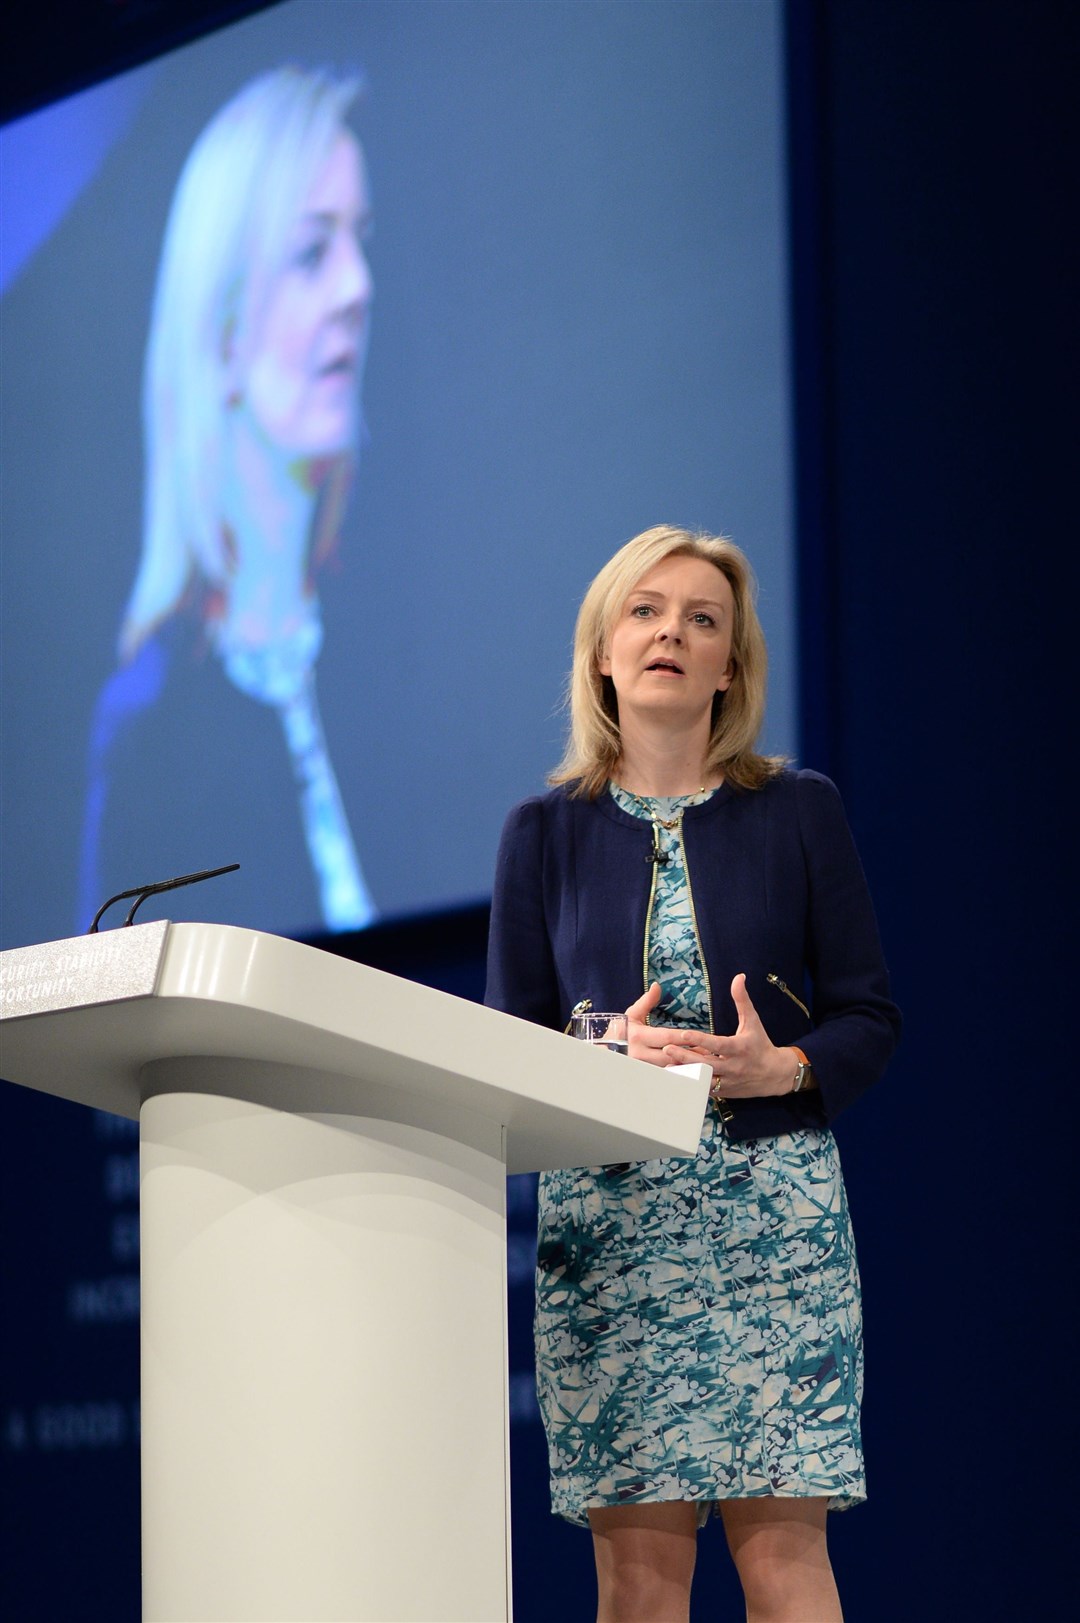 Then-environment secretary Liz Truss addressing the Conservative Party conference in Manchester (Stefan Rousseau/PA)